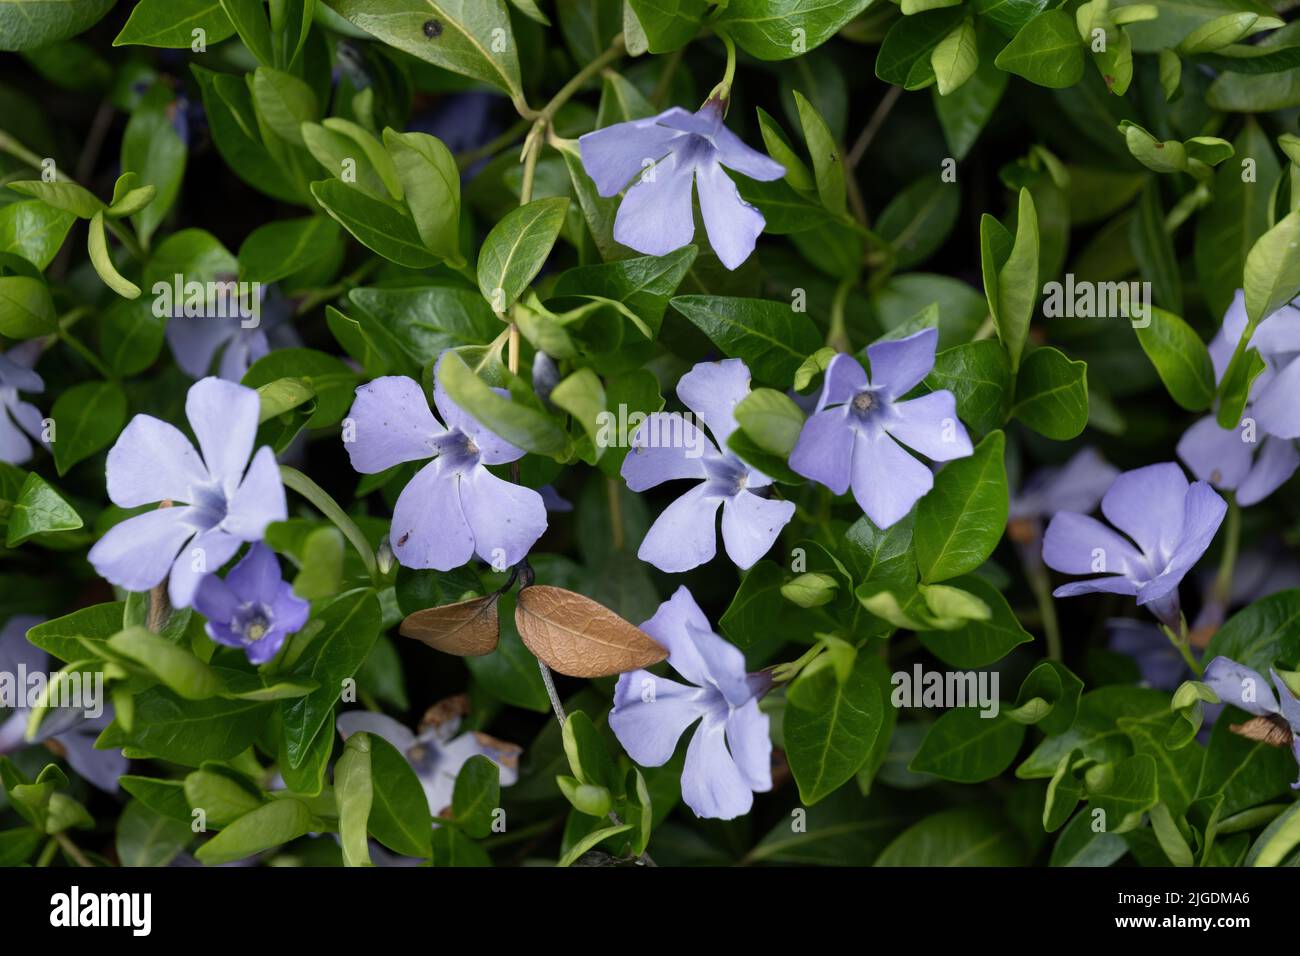 Vinca minor L. flowers, lesser periwinkle or dwarf periwinkle, flowering plant in the family Apocynaceae. Stock Photo